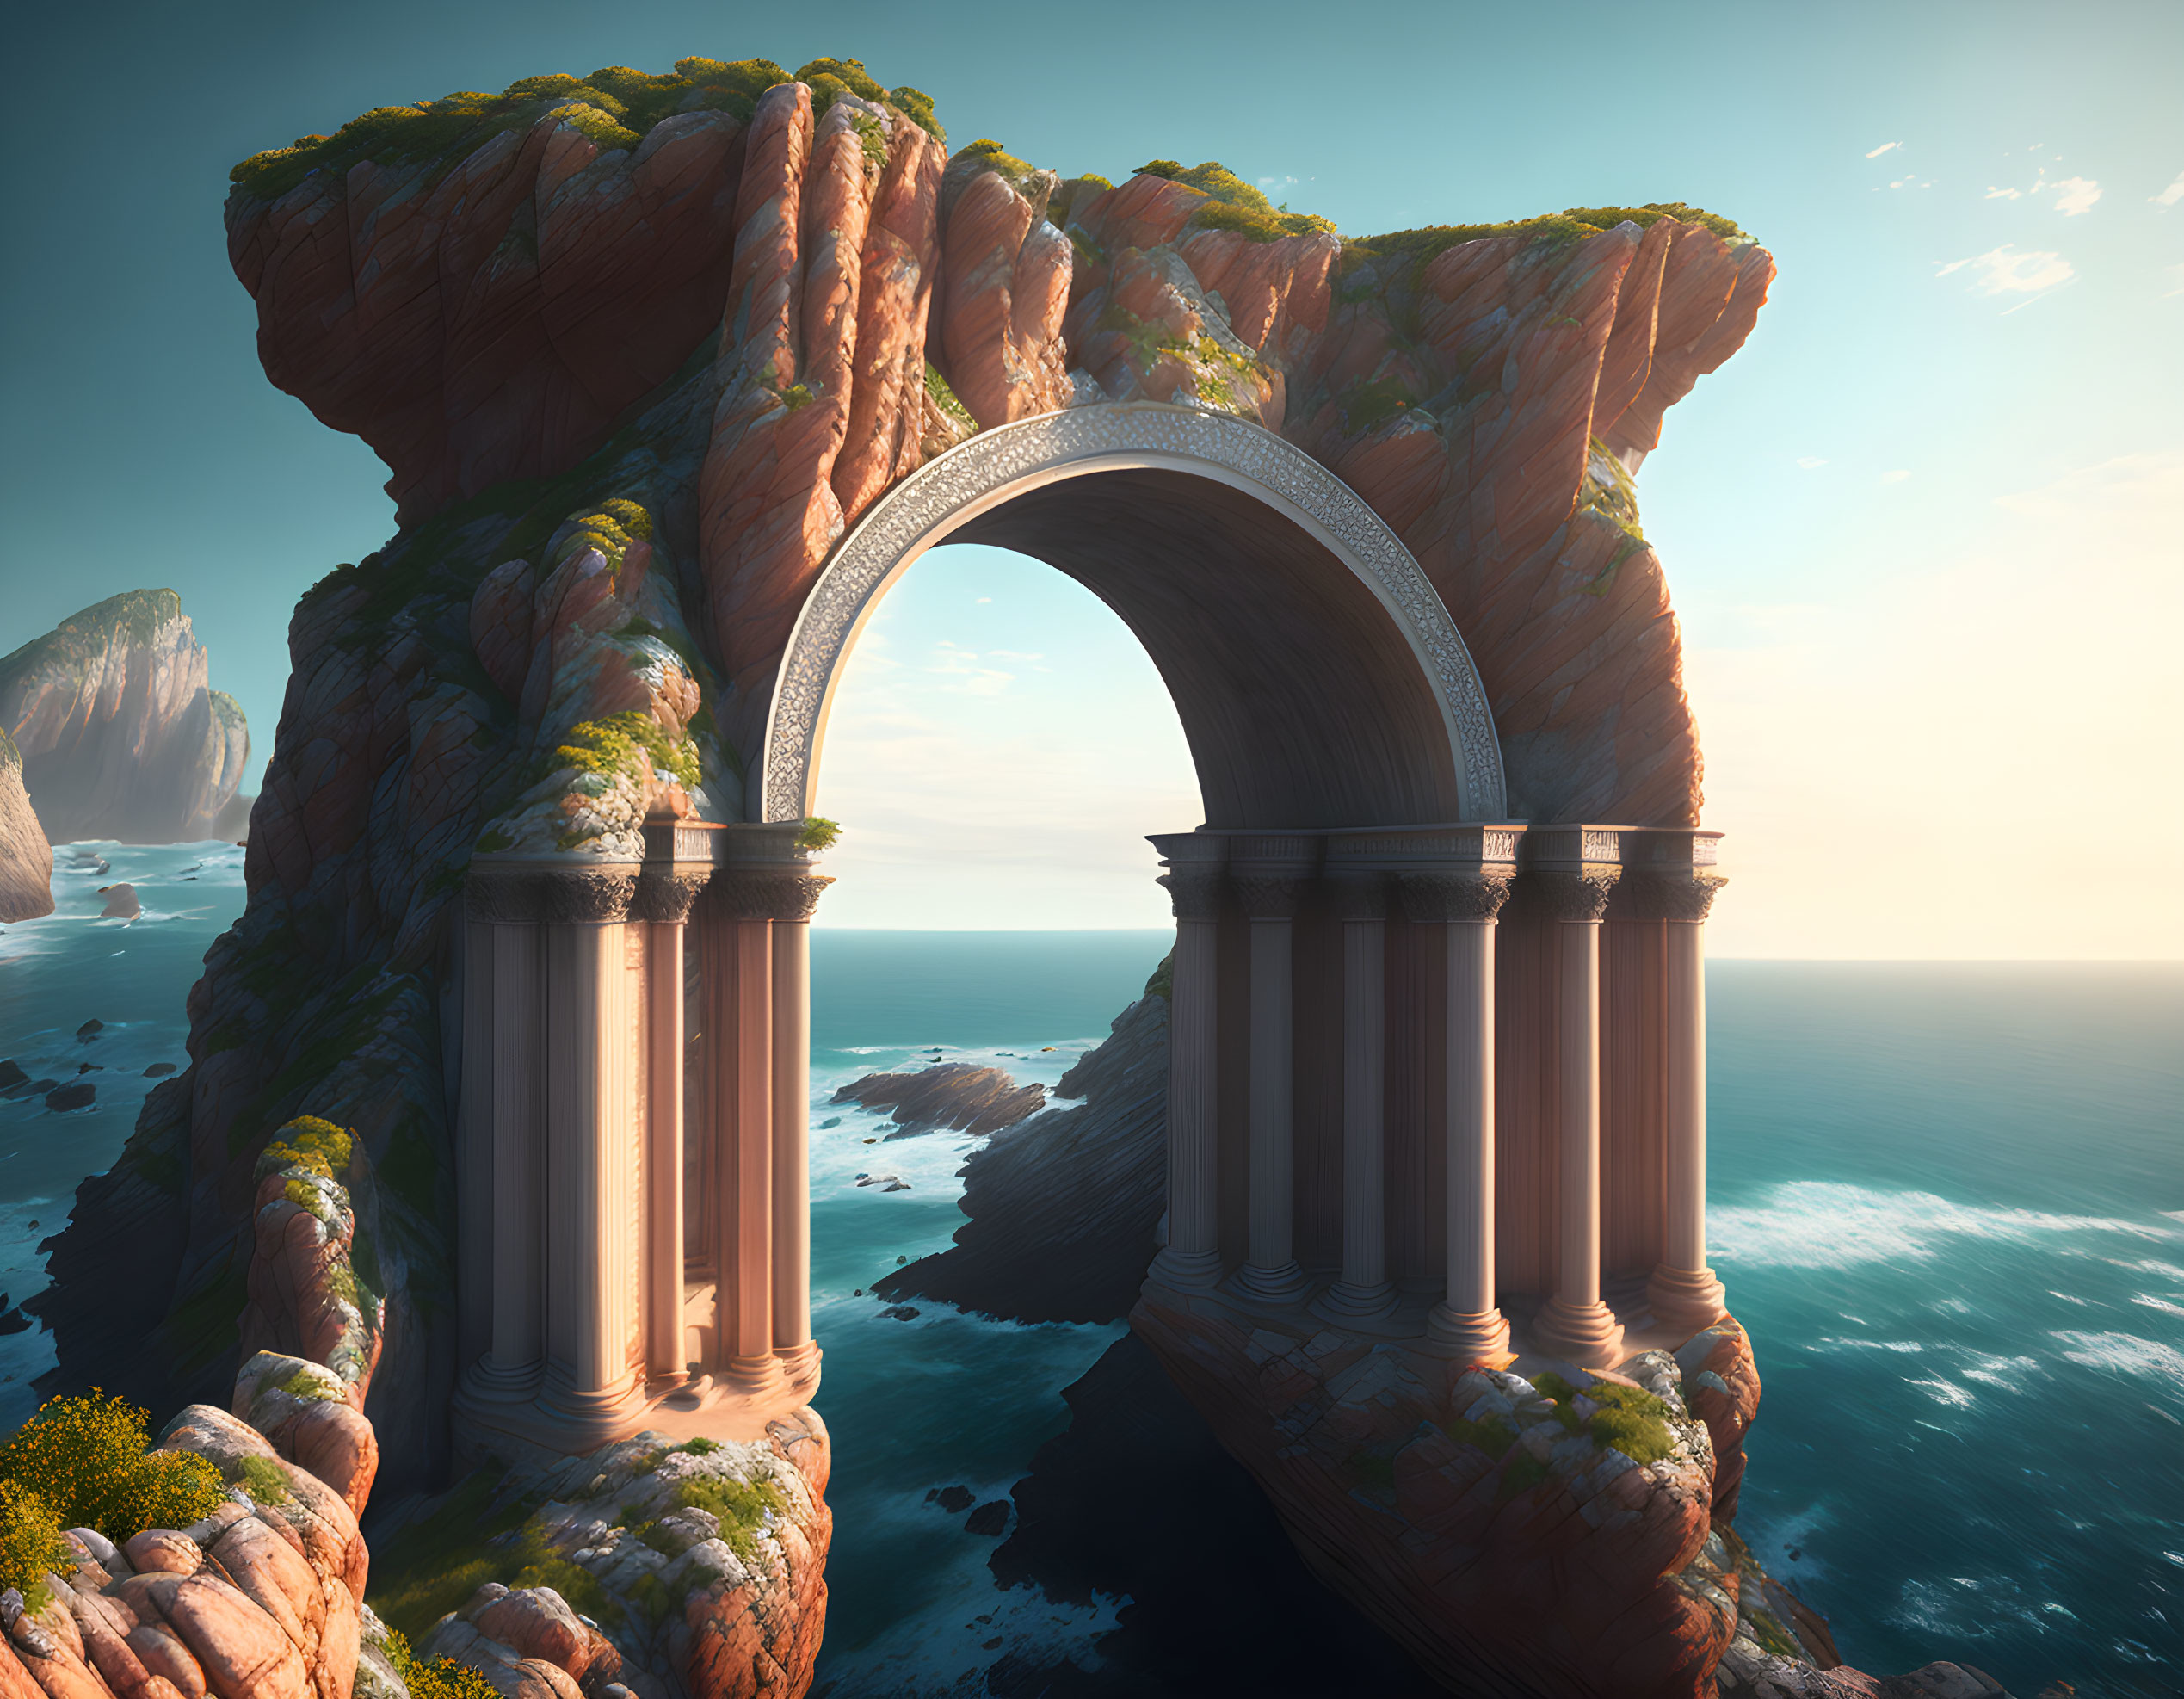 Stone Arch Structure with Classical Columns on Cliff Overlooking Ocean at Sunset